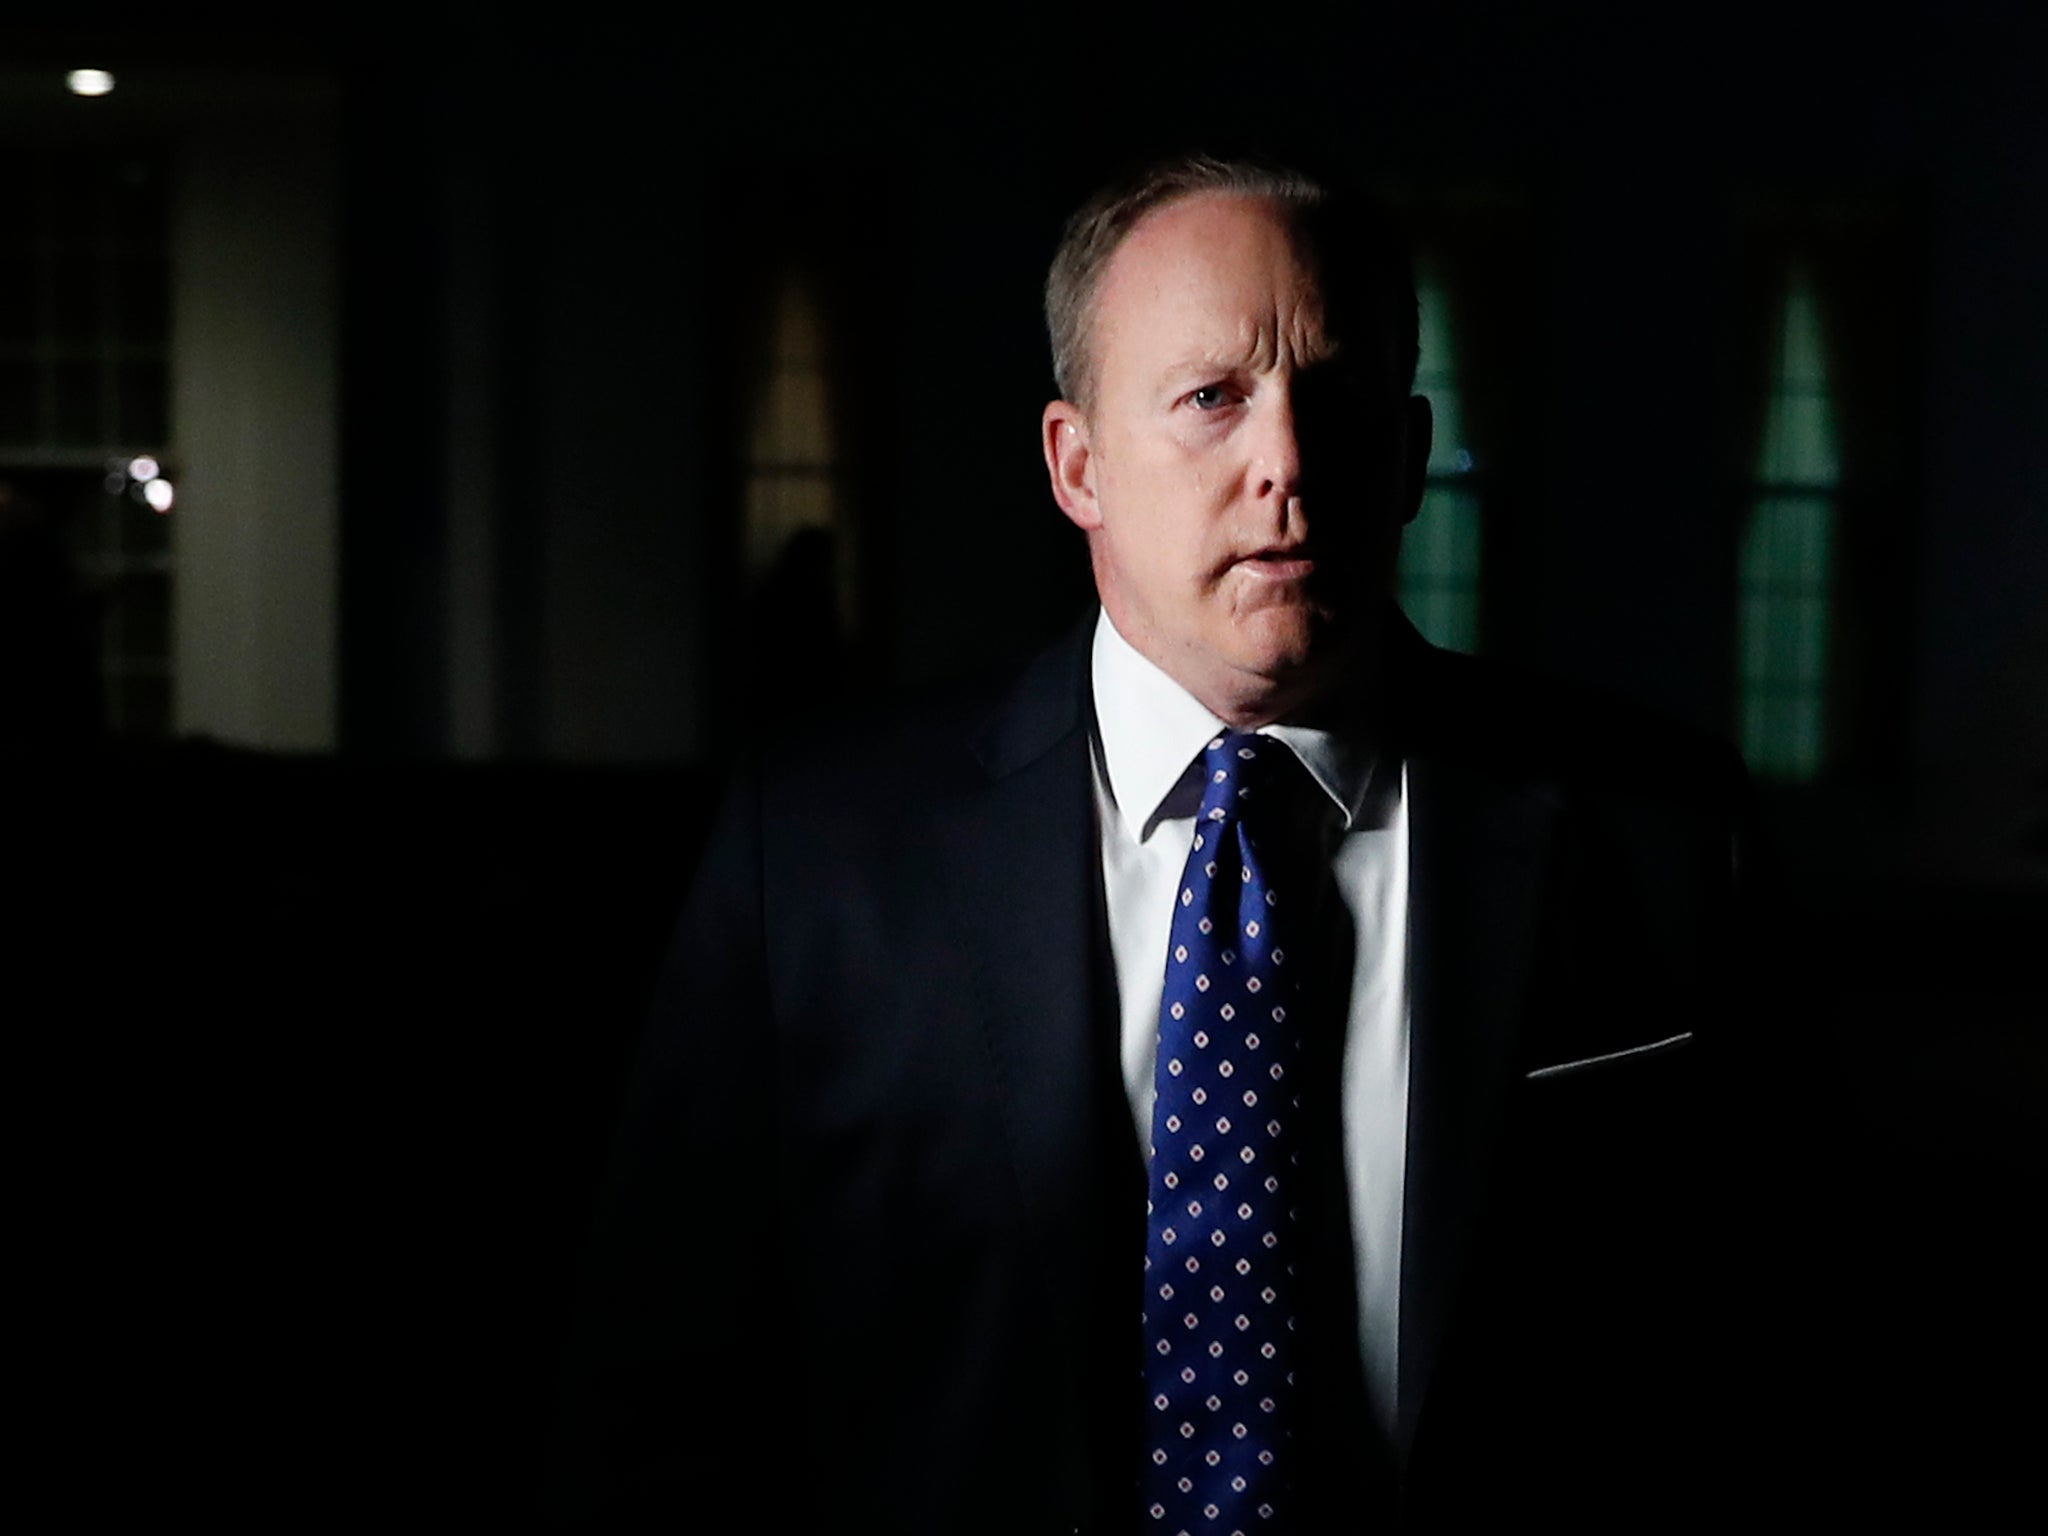 White House press secretary Sean Spicer walks from the West Wing to speak to reporters